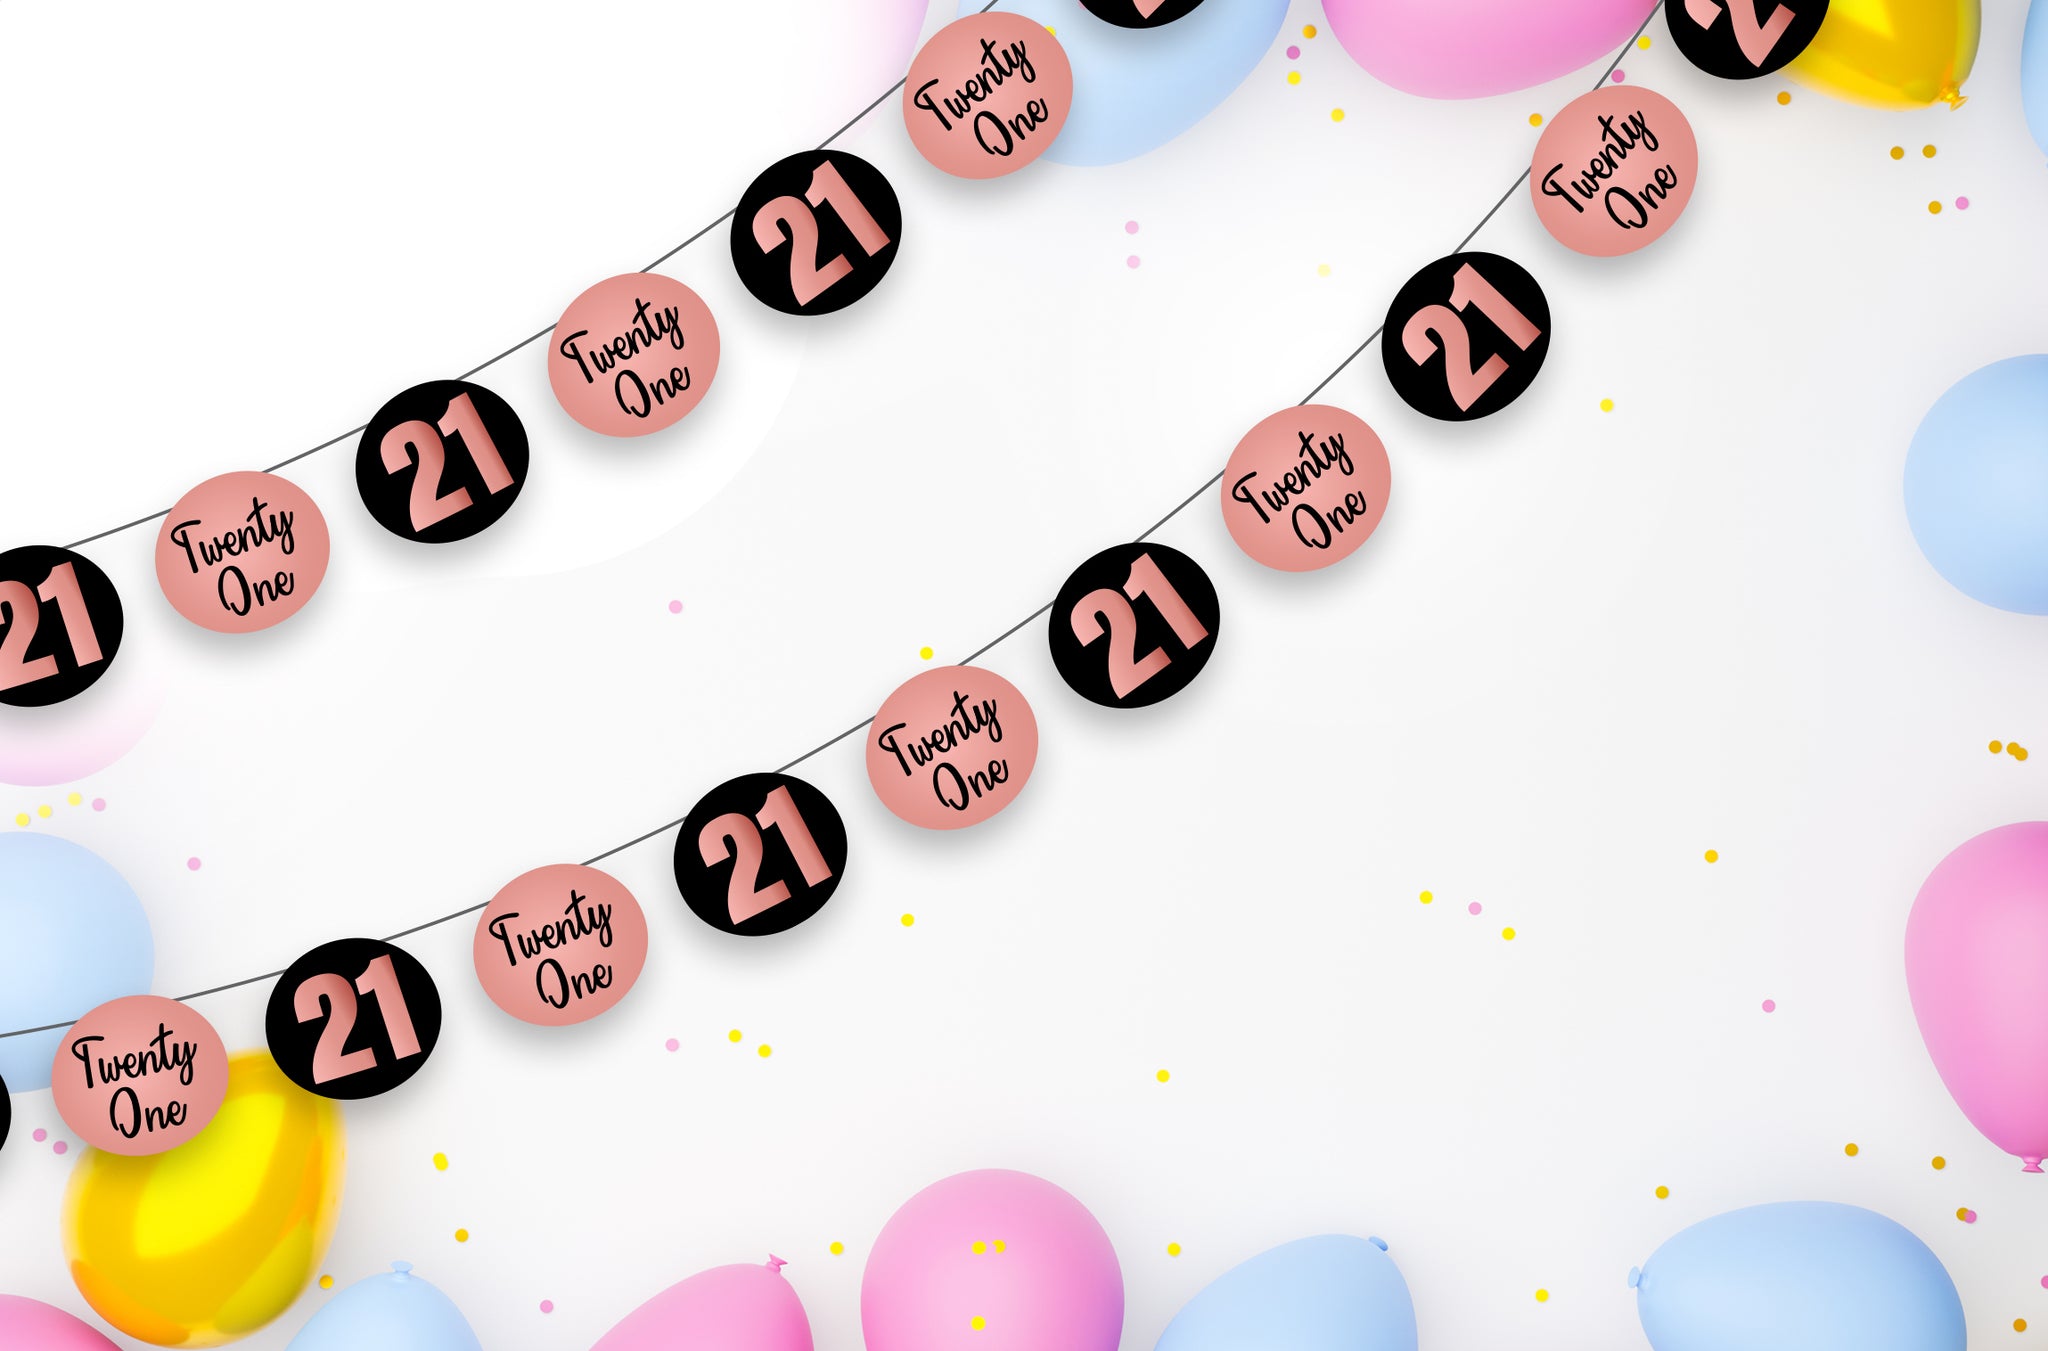 21st Birthday party favors!  21st birthday party favors, Birthday party  21, 21st birthday themes